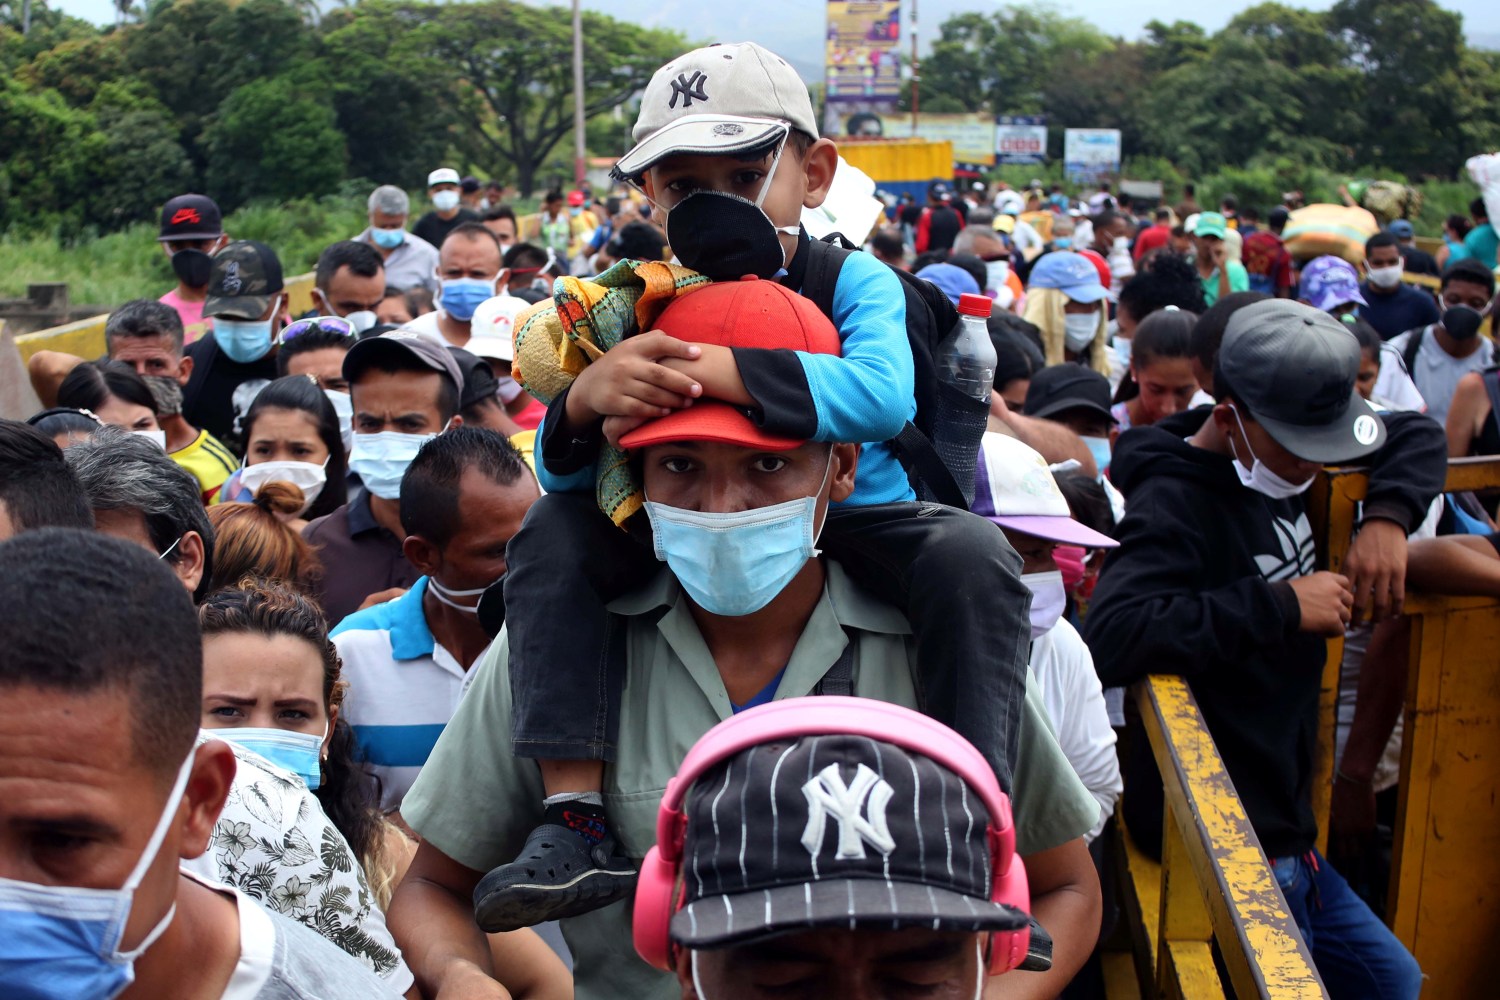 People wearing protective face masks line up to cross the border between Colombia and Venezuela at Simon Bolivar international bridge in Cucuta, Colombia March 12, 2020. REUTERS/Carlos Eduardo Ramirez